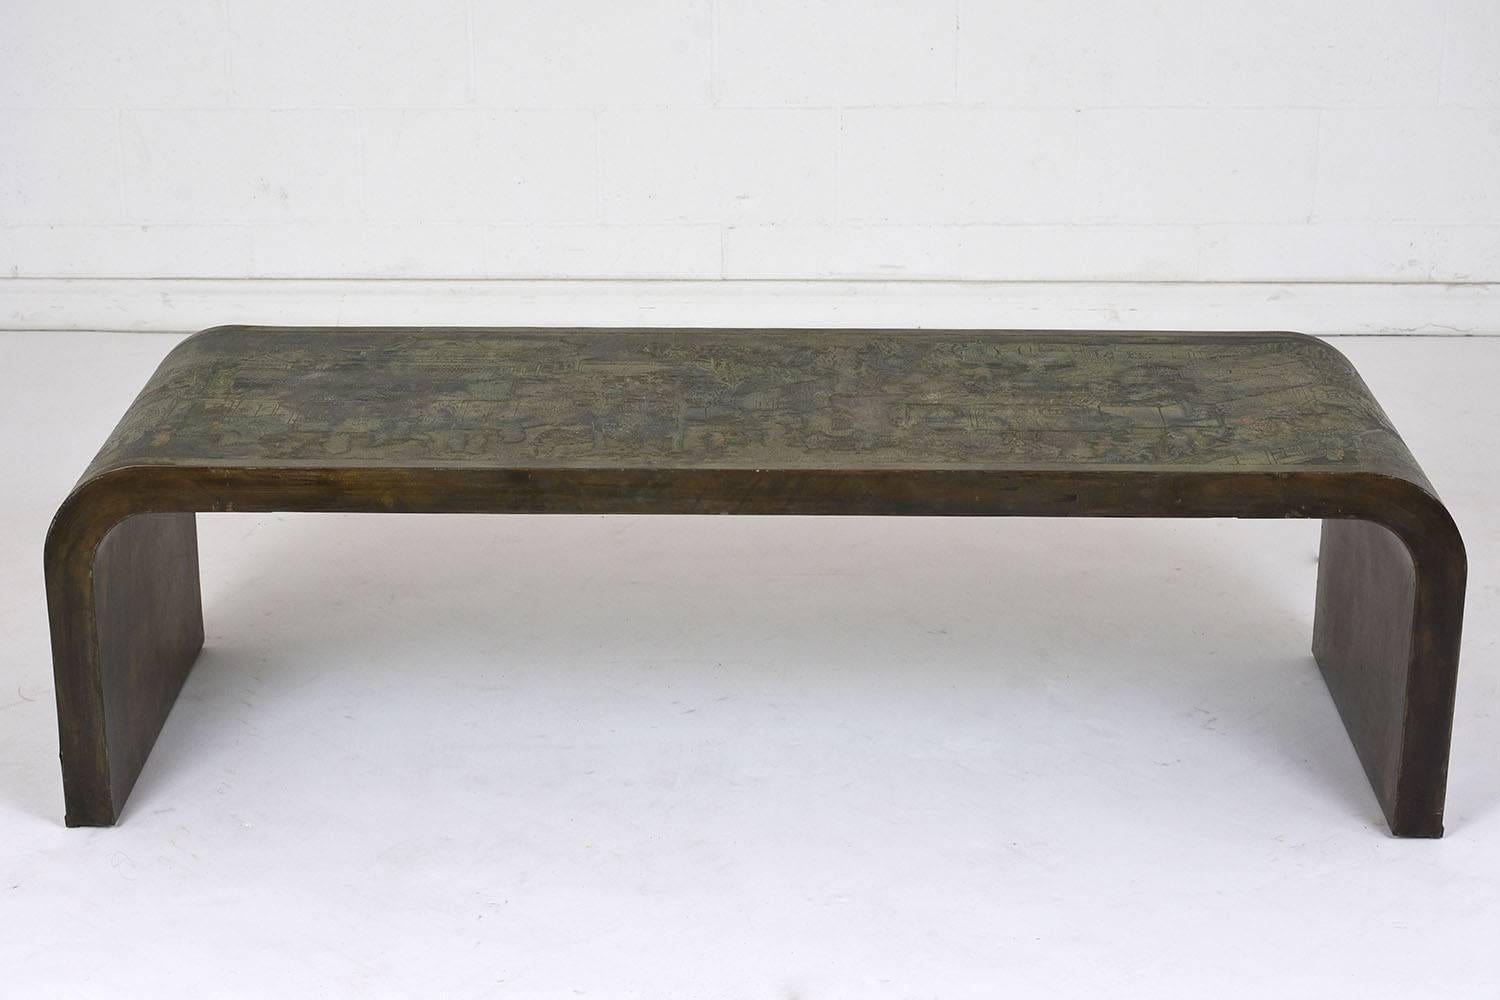 This 1960s Modern-style coffee table is signed and designed by Philip Kelvin Laverne. The coffee table is made of bronze with a flat finish. The simplicity of the curved edges and unique profile are accented by the different colors found in the